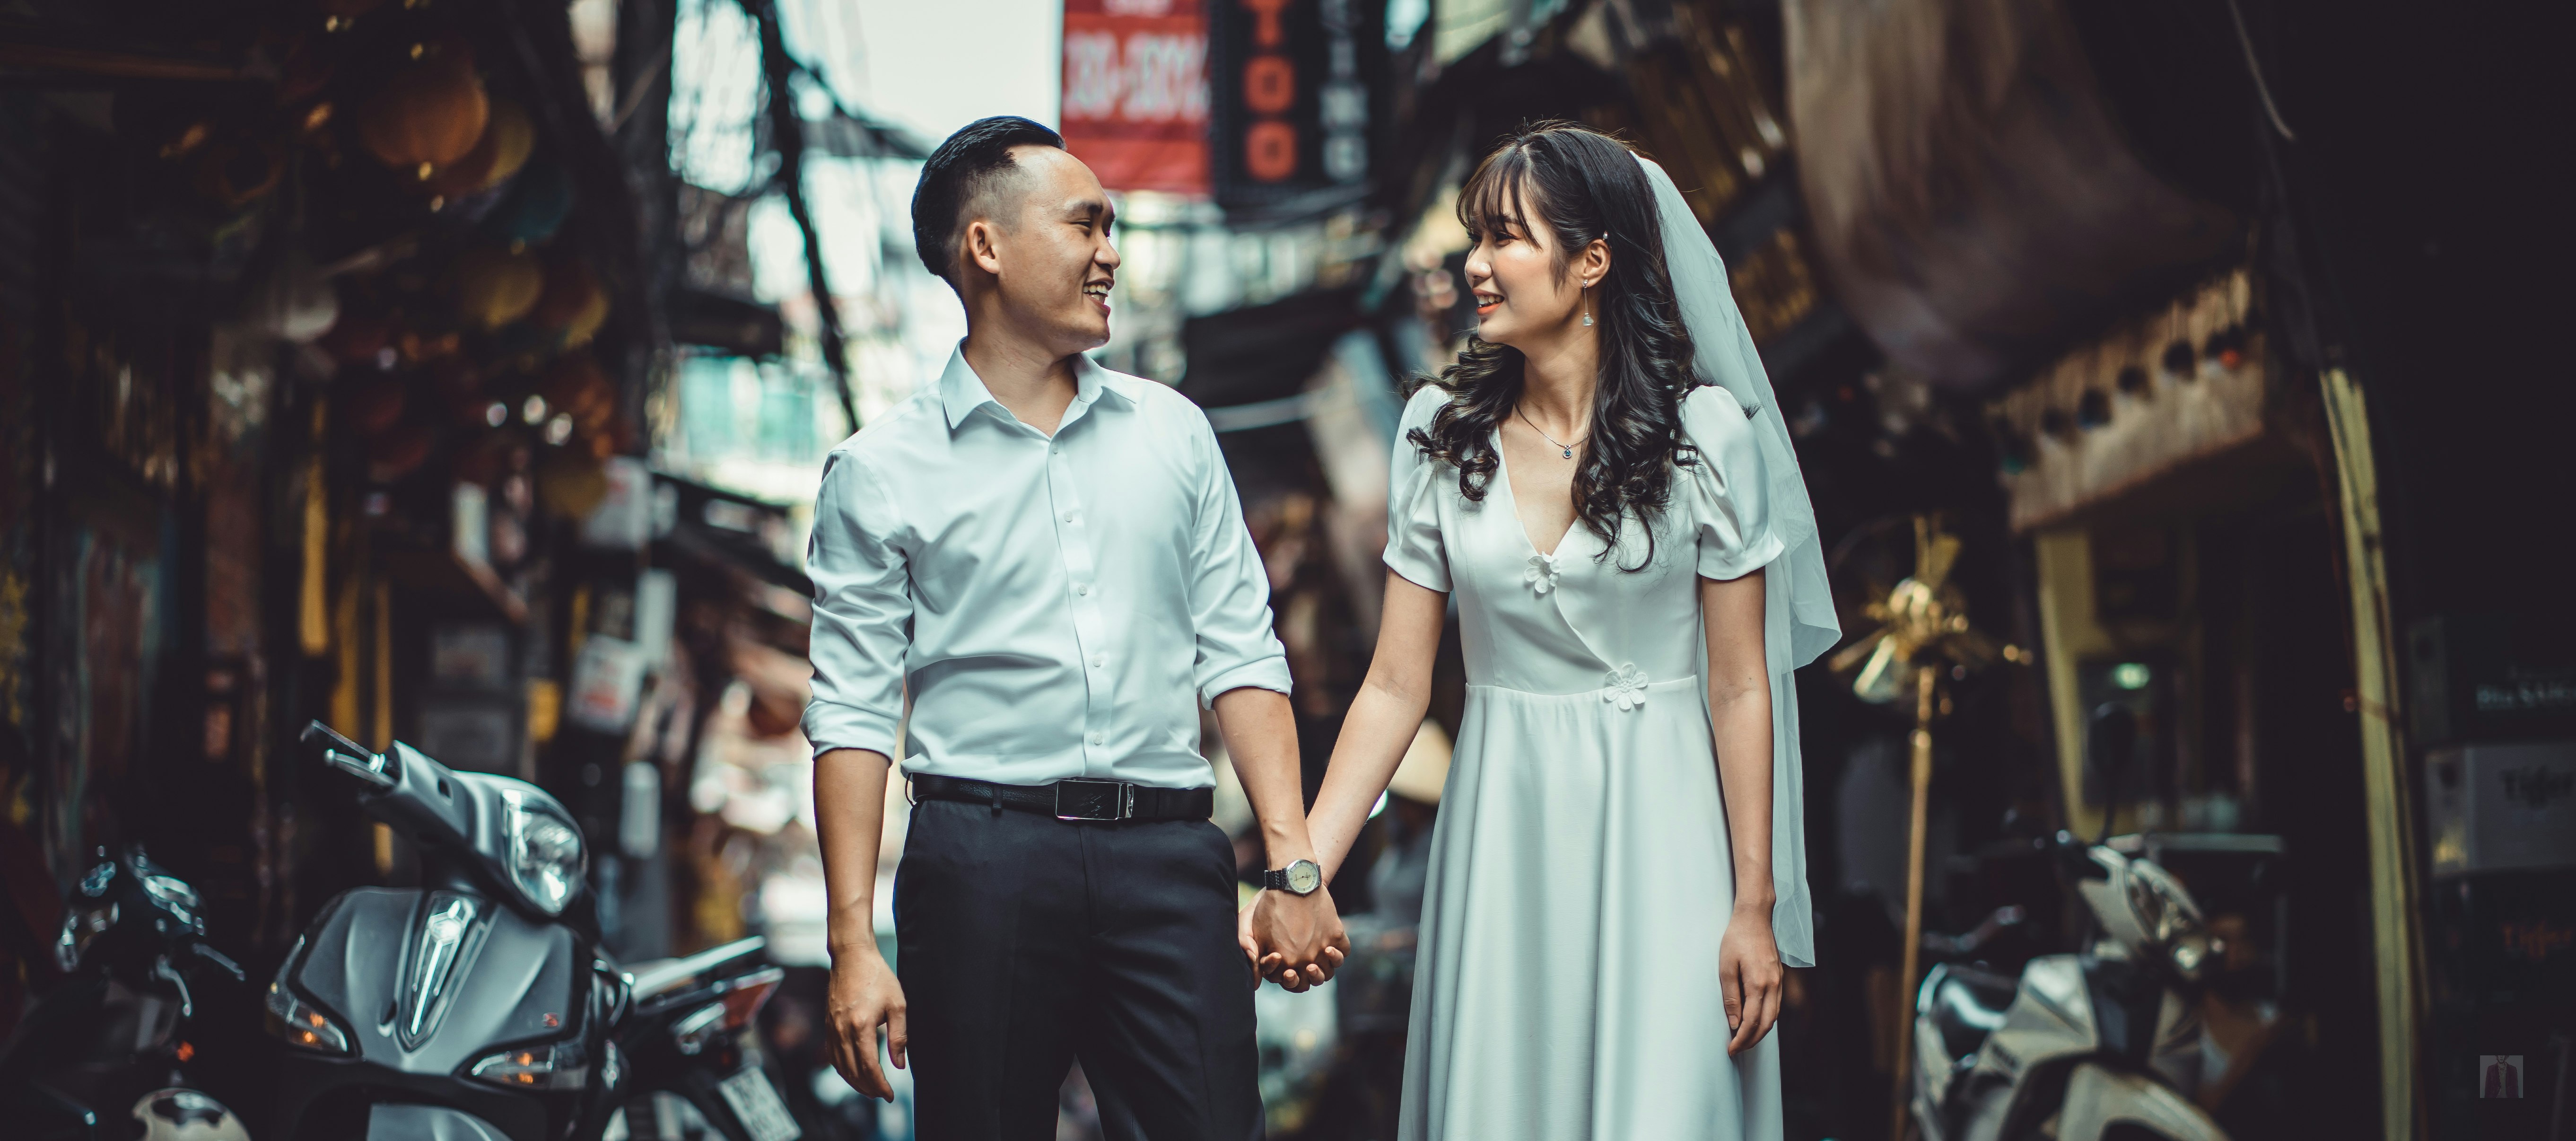 man in blue button up shirt and woman in white dress